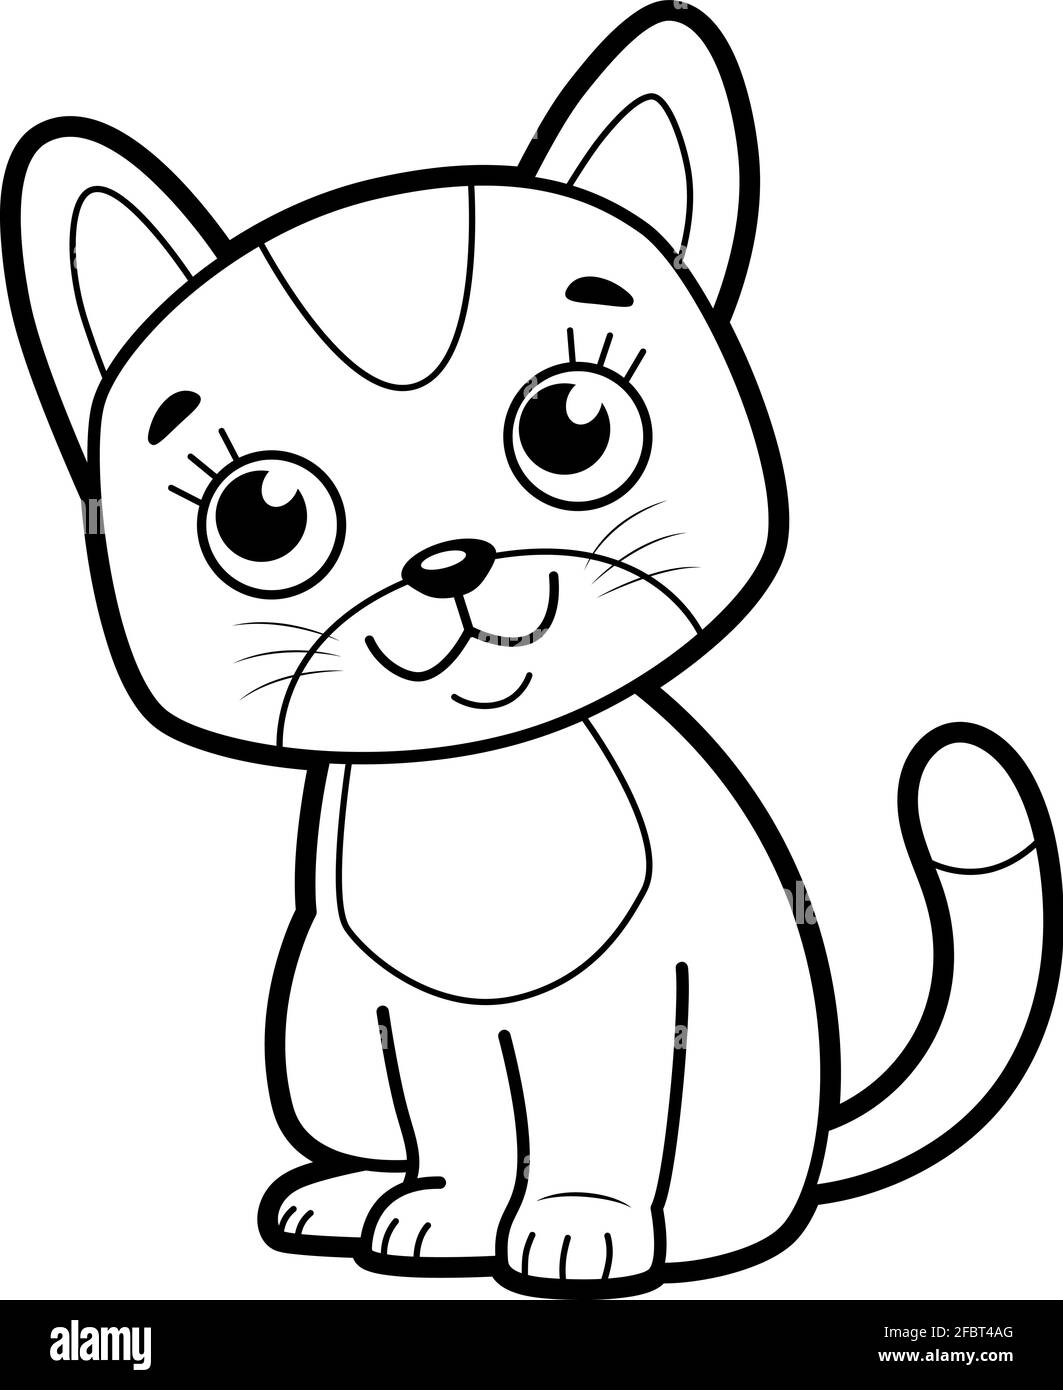 Coloring book or page for kids. Cat black and white vector illustration  Stock Vector Image & Art - Alamy